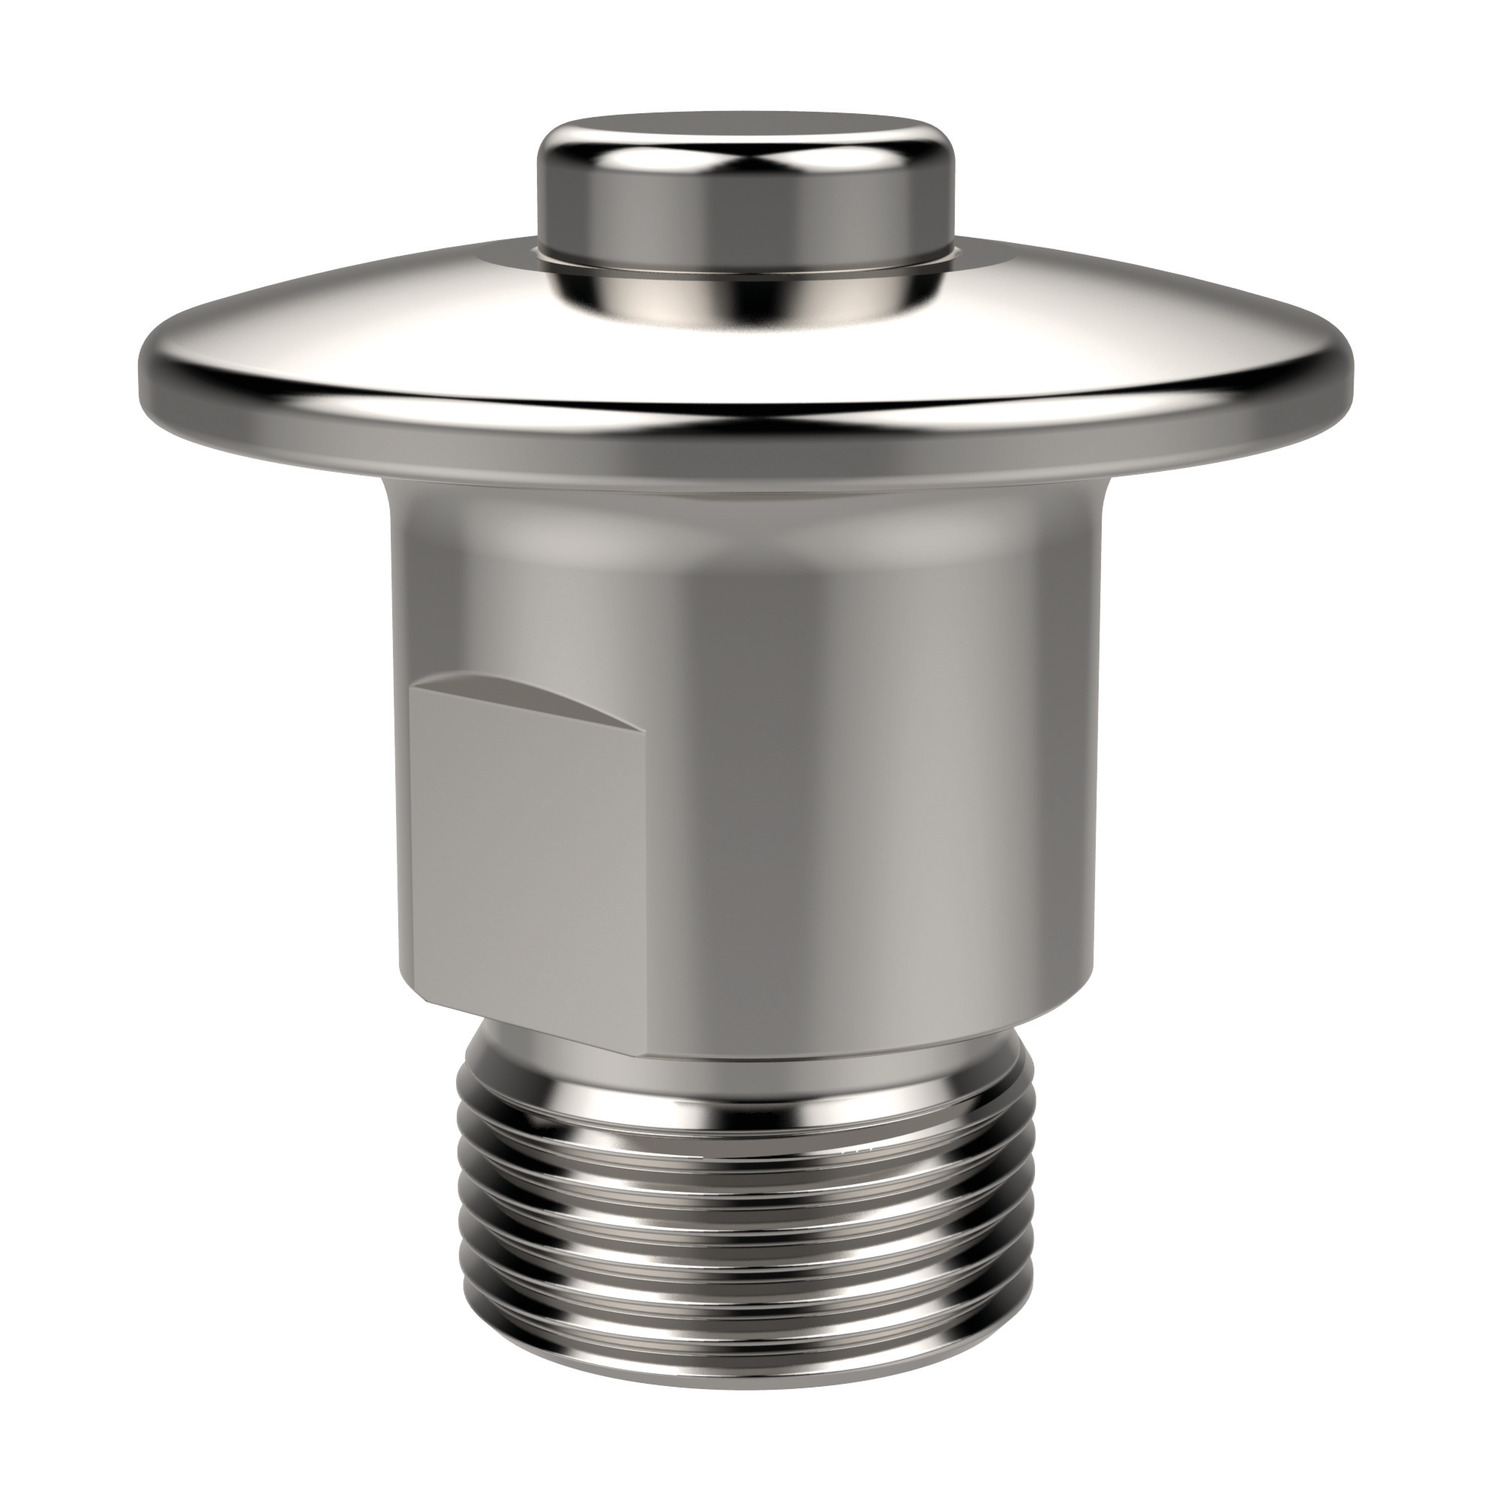 One-Touch Fastener - Ball Clamping Ball bearings in the receptacle clamp onto the shaft of the pin to secure. Receptacles come in mechanical and safety release models.